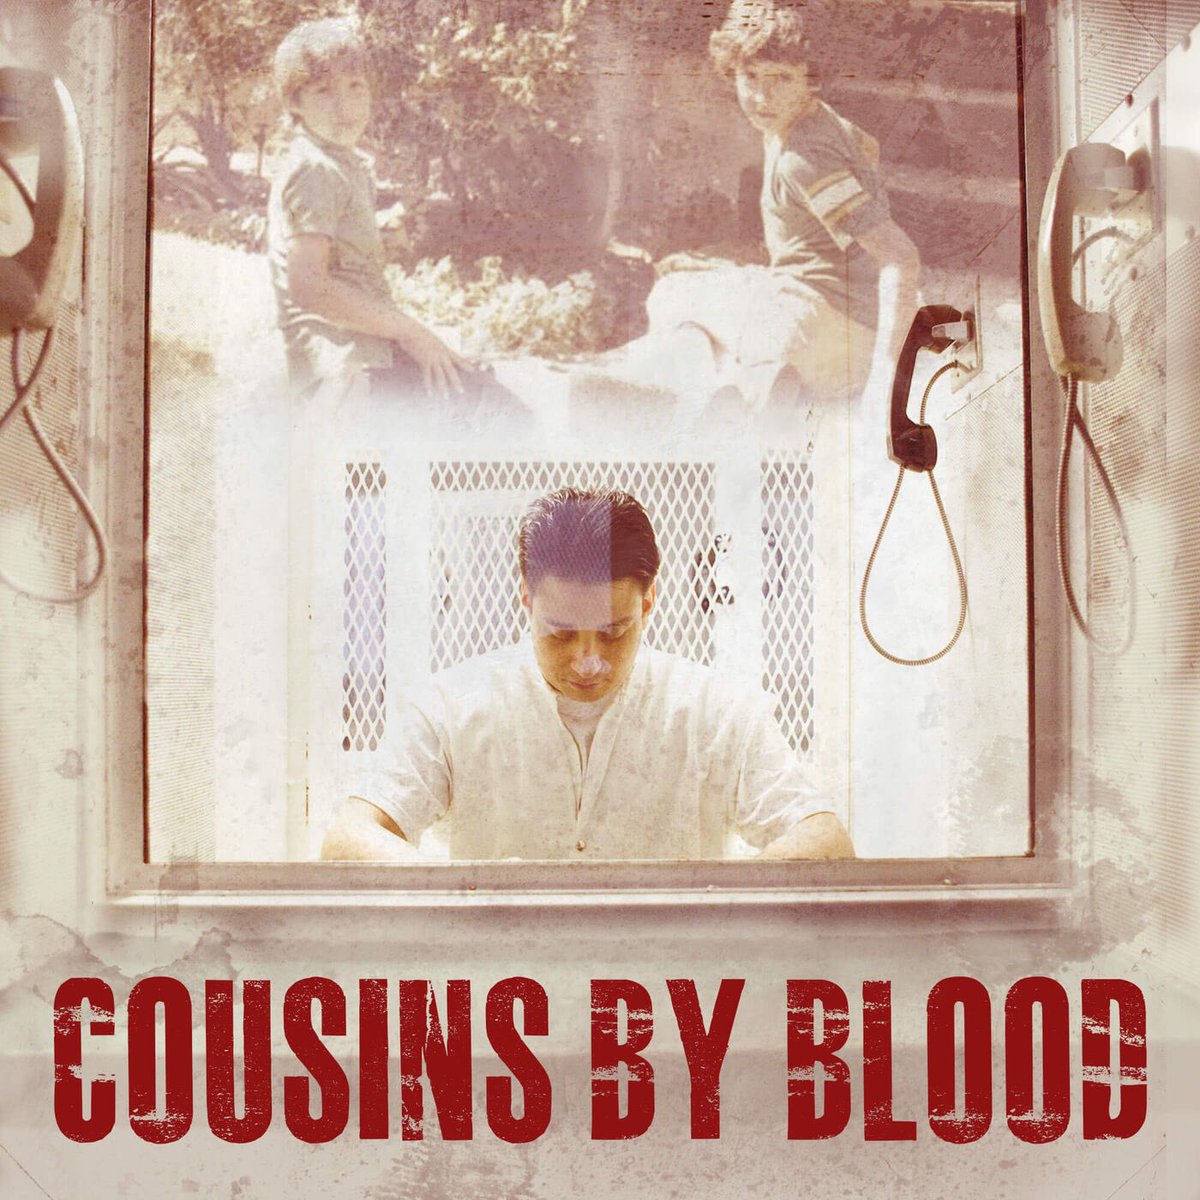 #IvanCantu is an #Innocent man who is scheduled to be executed by the state of Texas on April 26th! I recommend this excellent Podcast that tells his case. @CousinsBloodPod (1/2) 

#deathpenalty @RDunhamDP